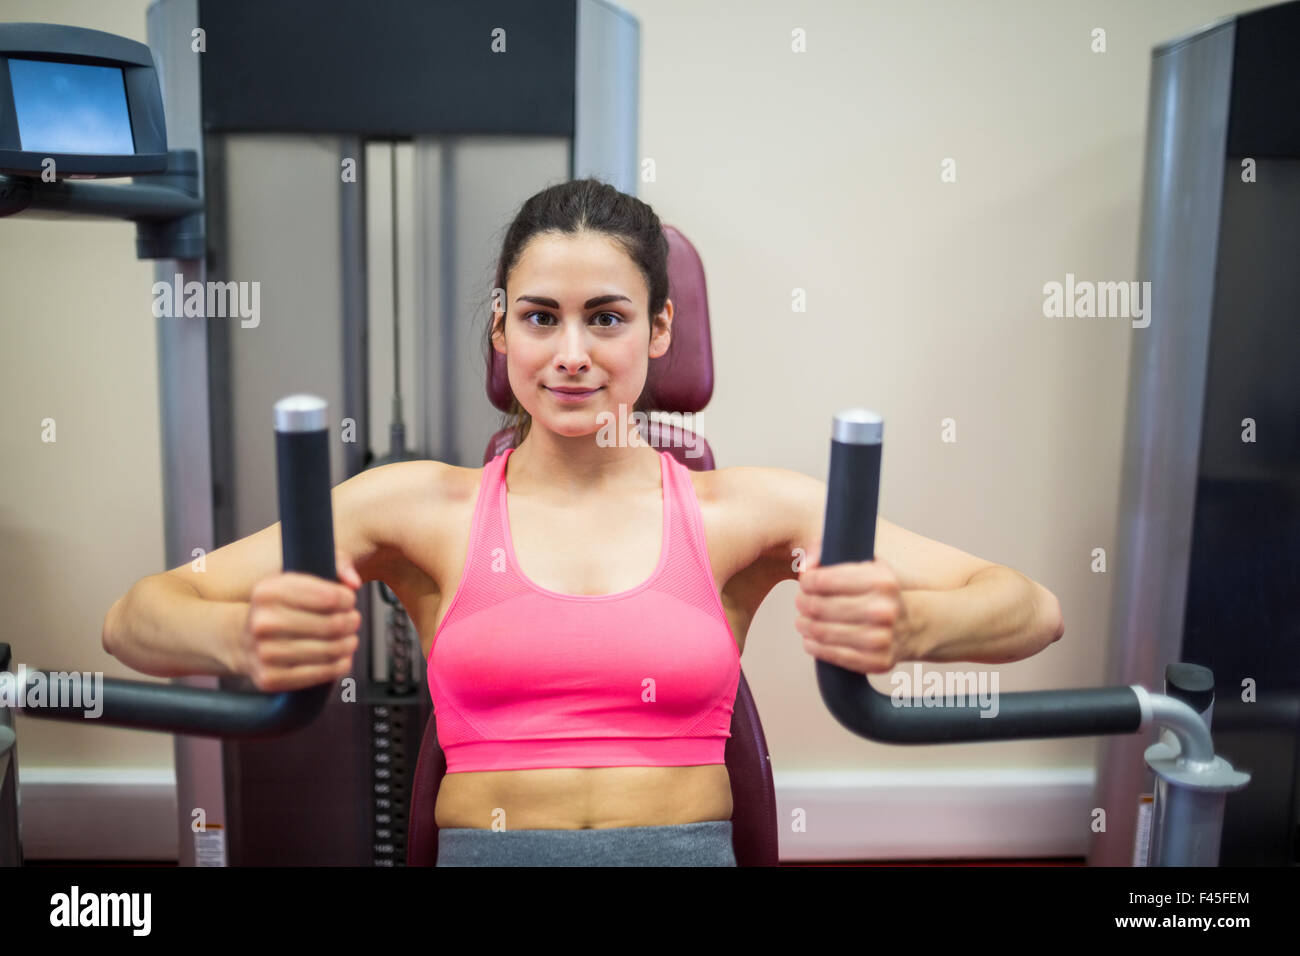 Determined woman working out Stock Photo